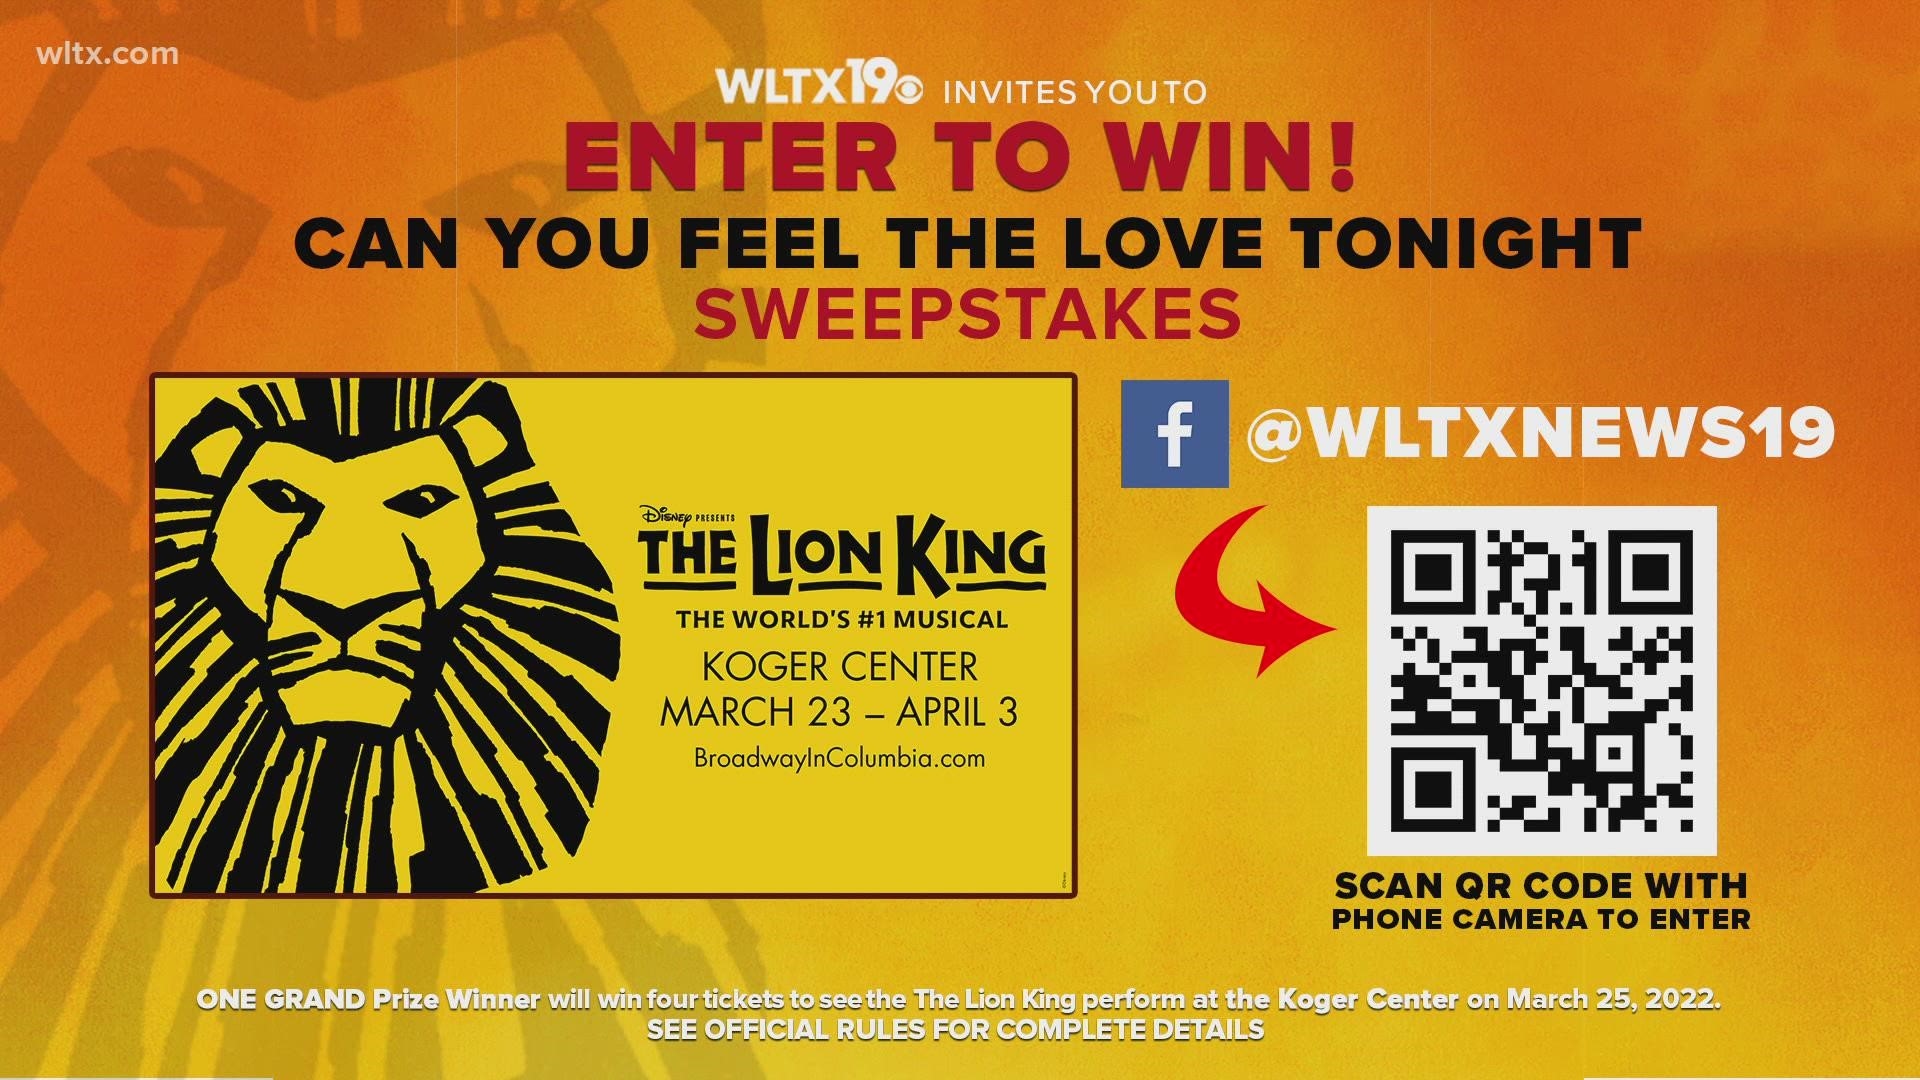 WLTX is partnering with Disney’s The Lion King to give a lucky winner a chance to win a Family Fun Pack - 4 tickets - to see Disney’s The Lion King.